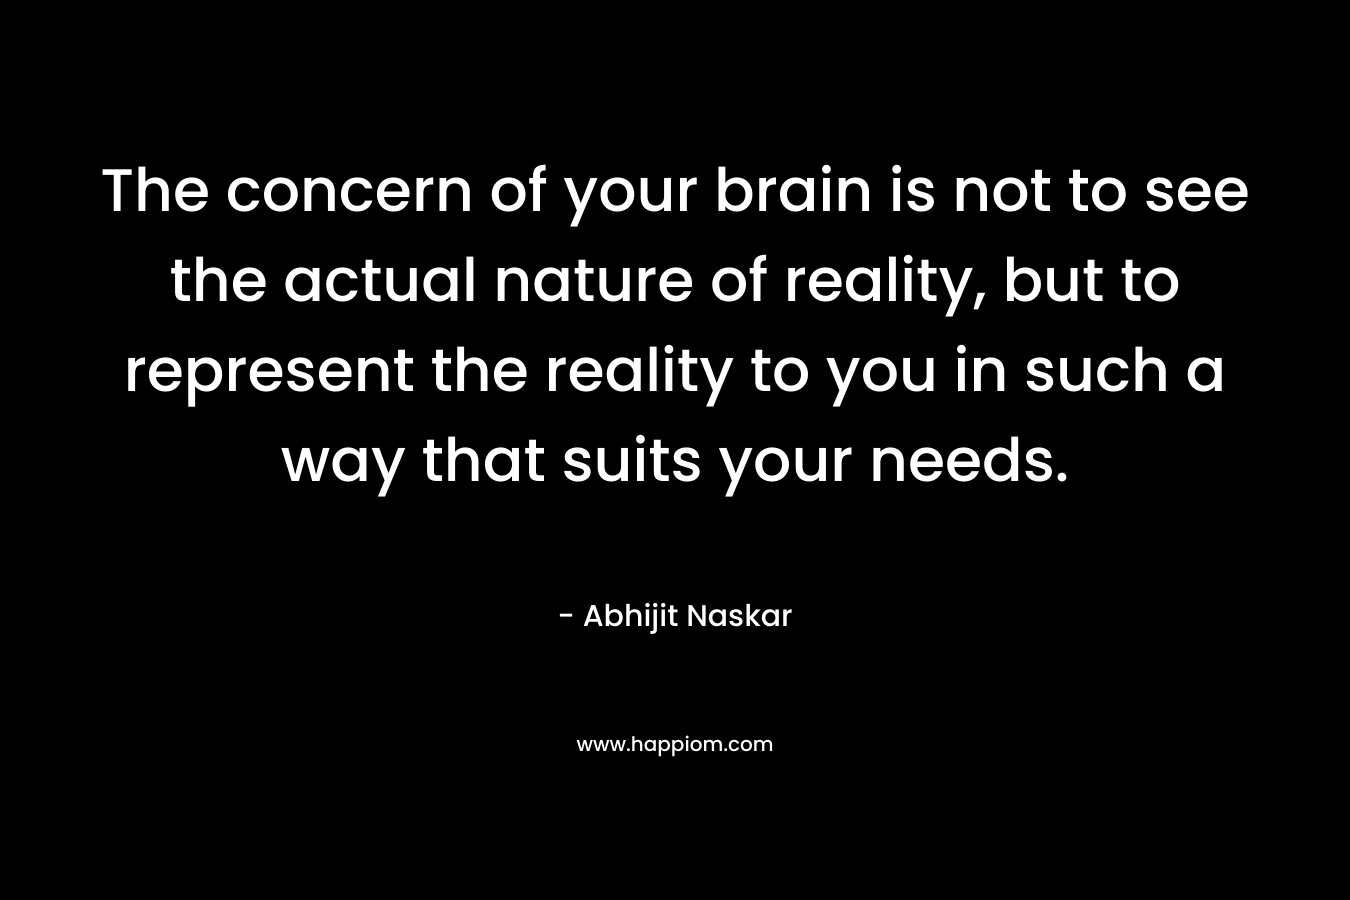 The concern of your brain is not to see the actual nature of reality, but to represent the reality to you in such a way that suits your needs.